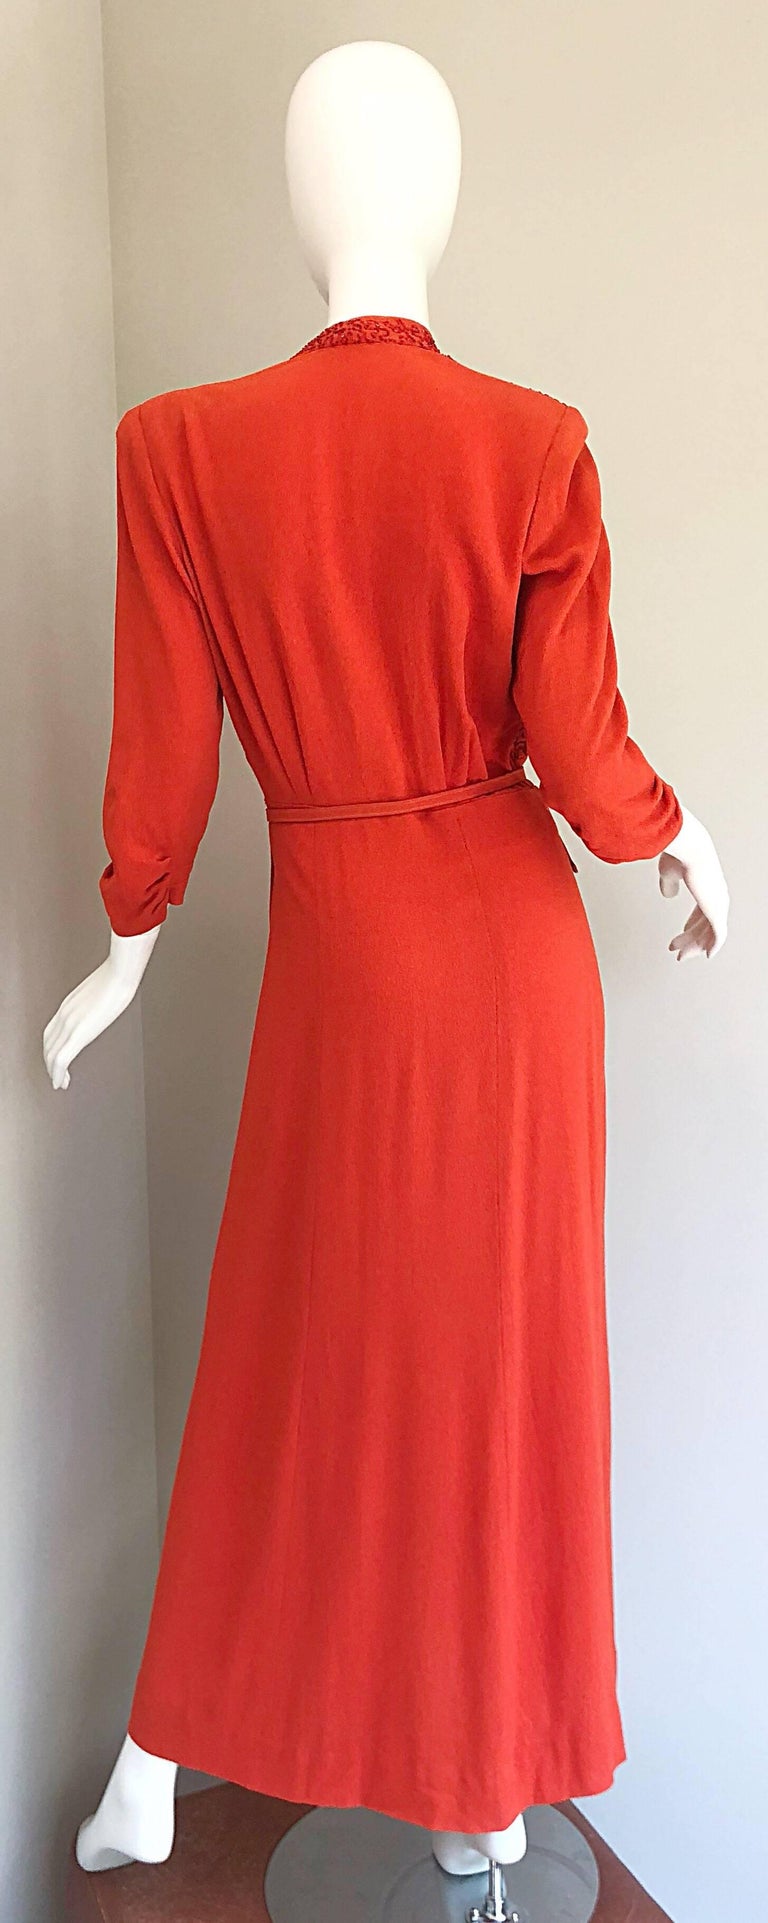 1940s Kornhauser Original Burnt Orange Beaded Vintage 40s Couture Crepe Gown In Excellent Condition For Sale In San Diego, CA